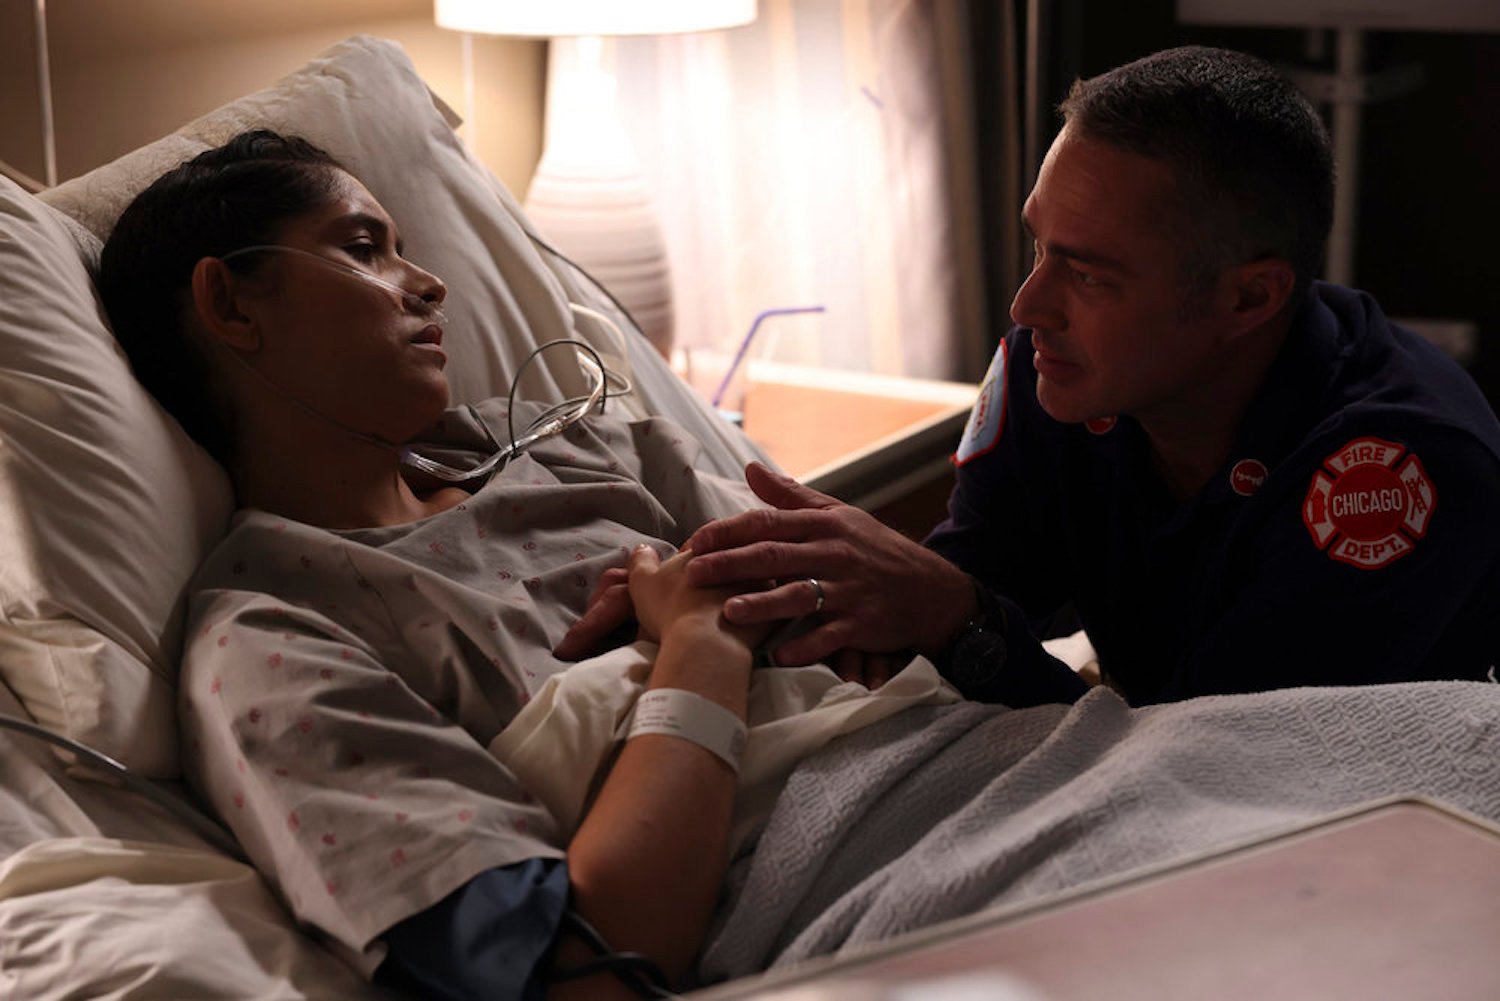 Stella Kidd in a hospital bed with Kelly Severide by her side in 'Chicago Fire' Season 11 Episode 10